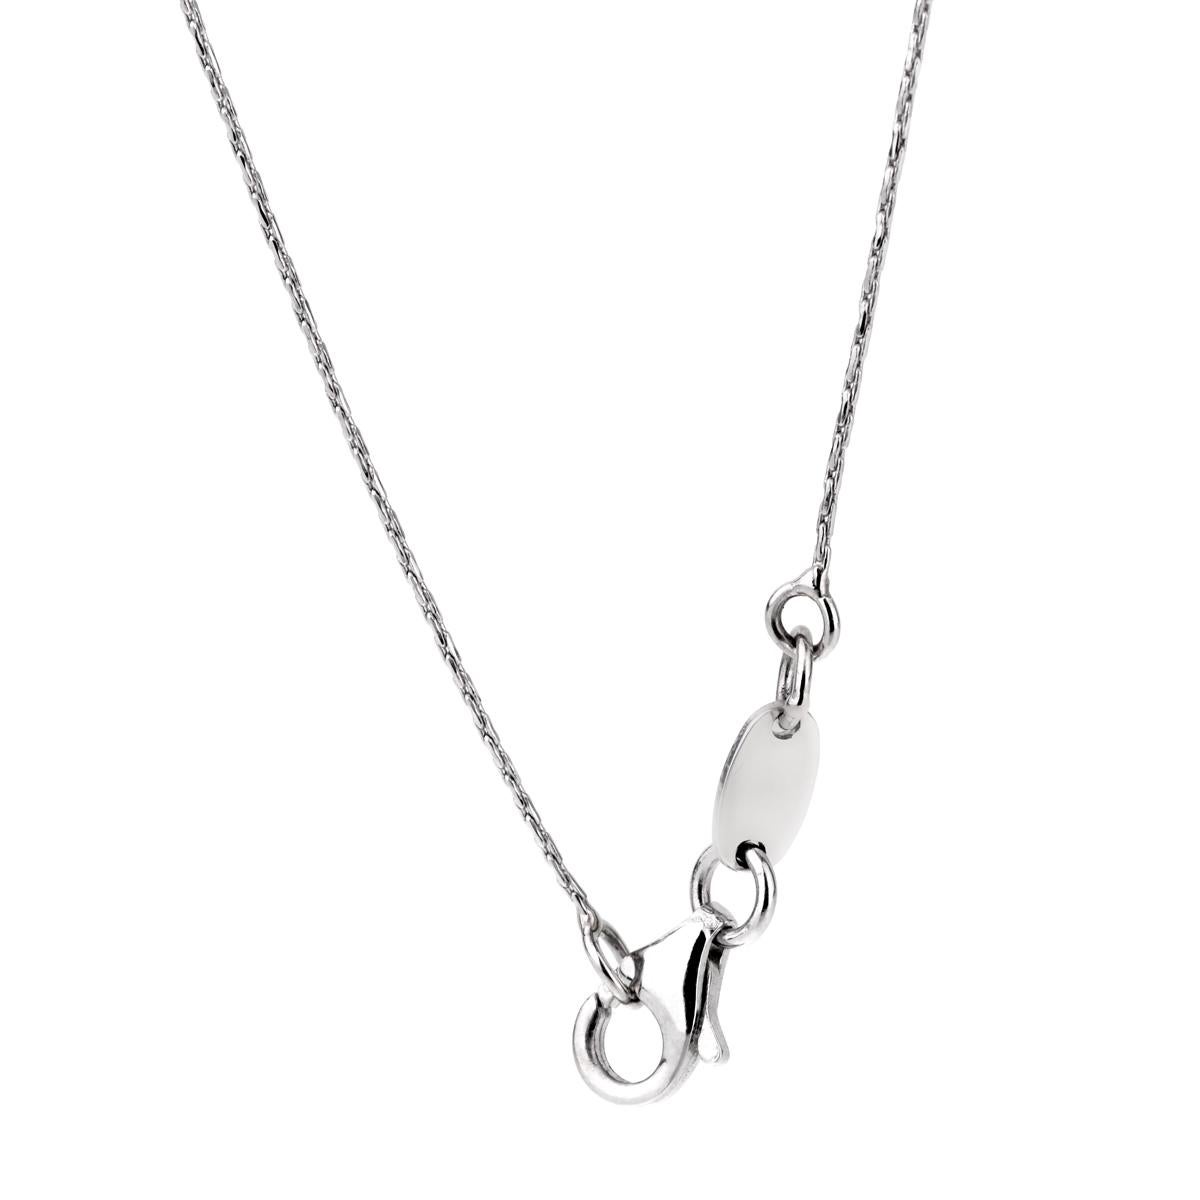 A chic Banco Oro line necklace featuring round brilliant cut diamonds pave set in 18k white gold. Necklace length 16